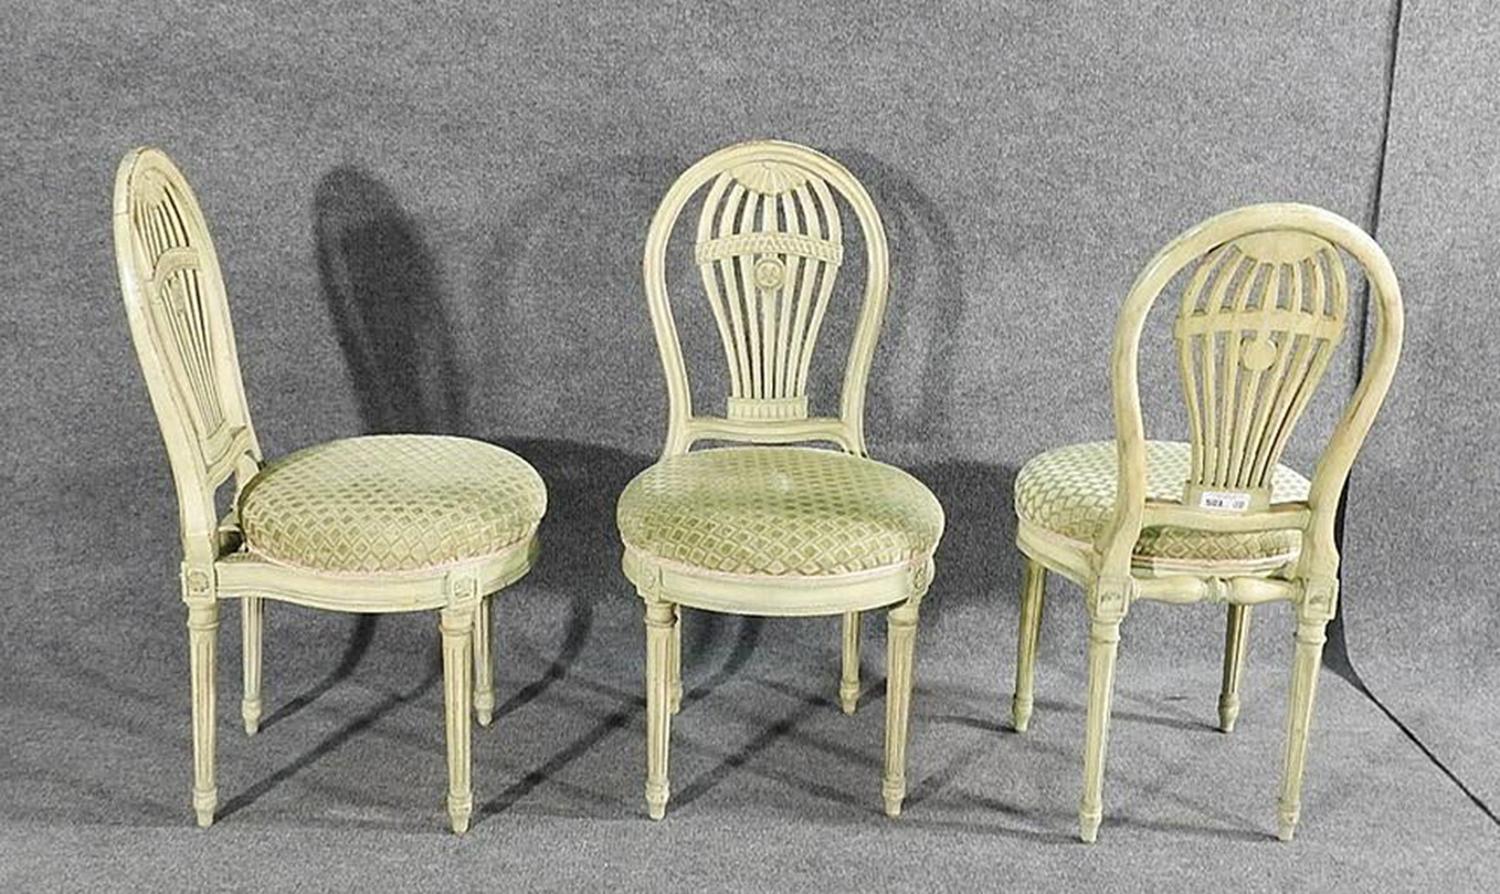 This is a fine set of Maison Jansen dining chairs in their original white painted finish and original and still very good upholstery, circa 1950s. The chairs are in good condition. The chairs measure 37